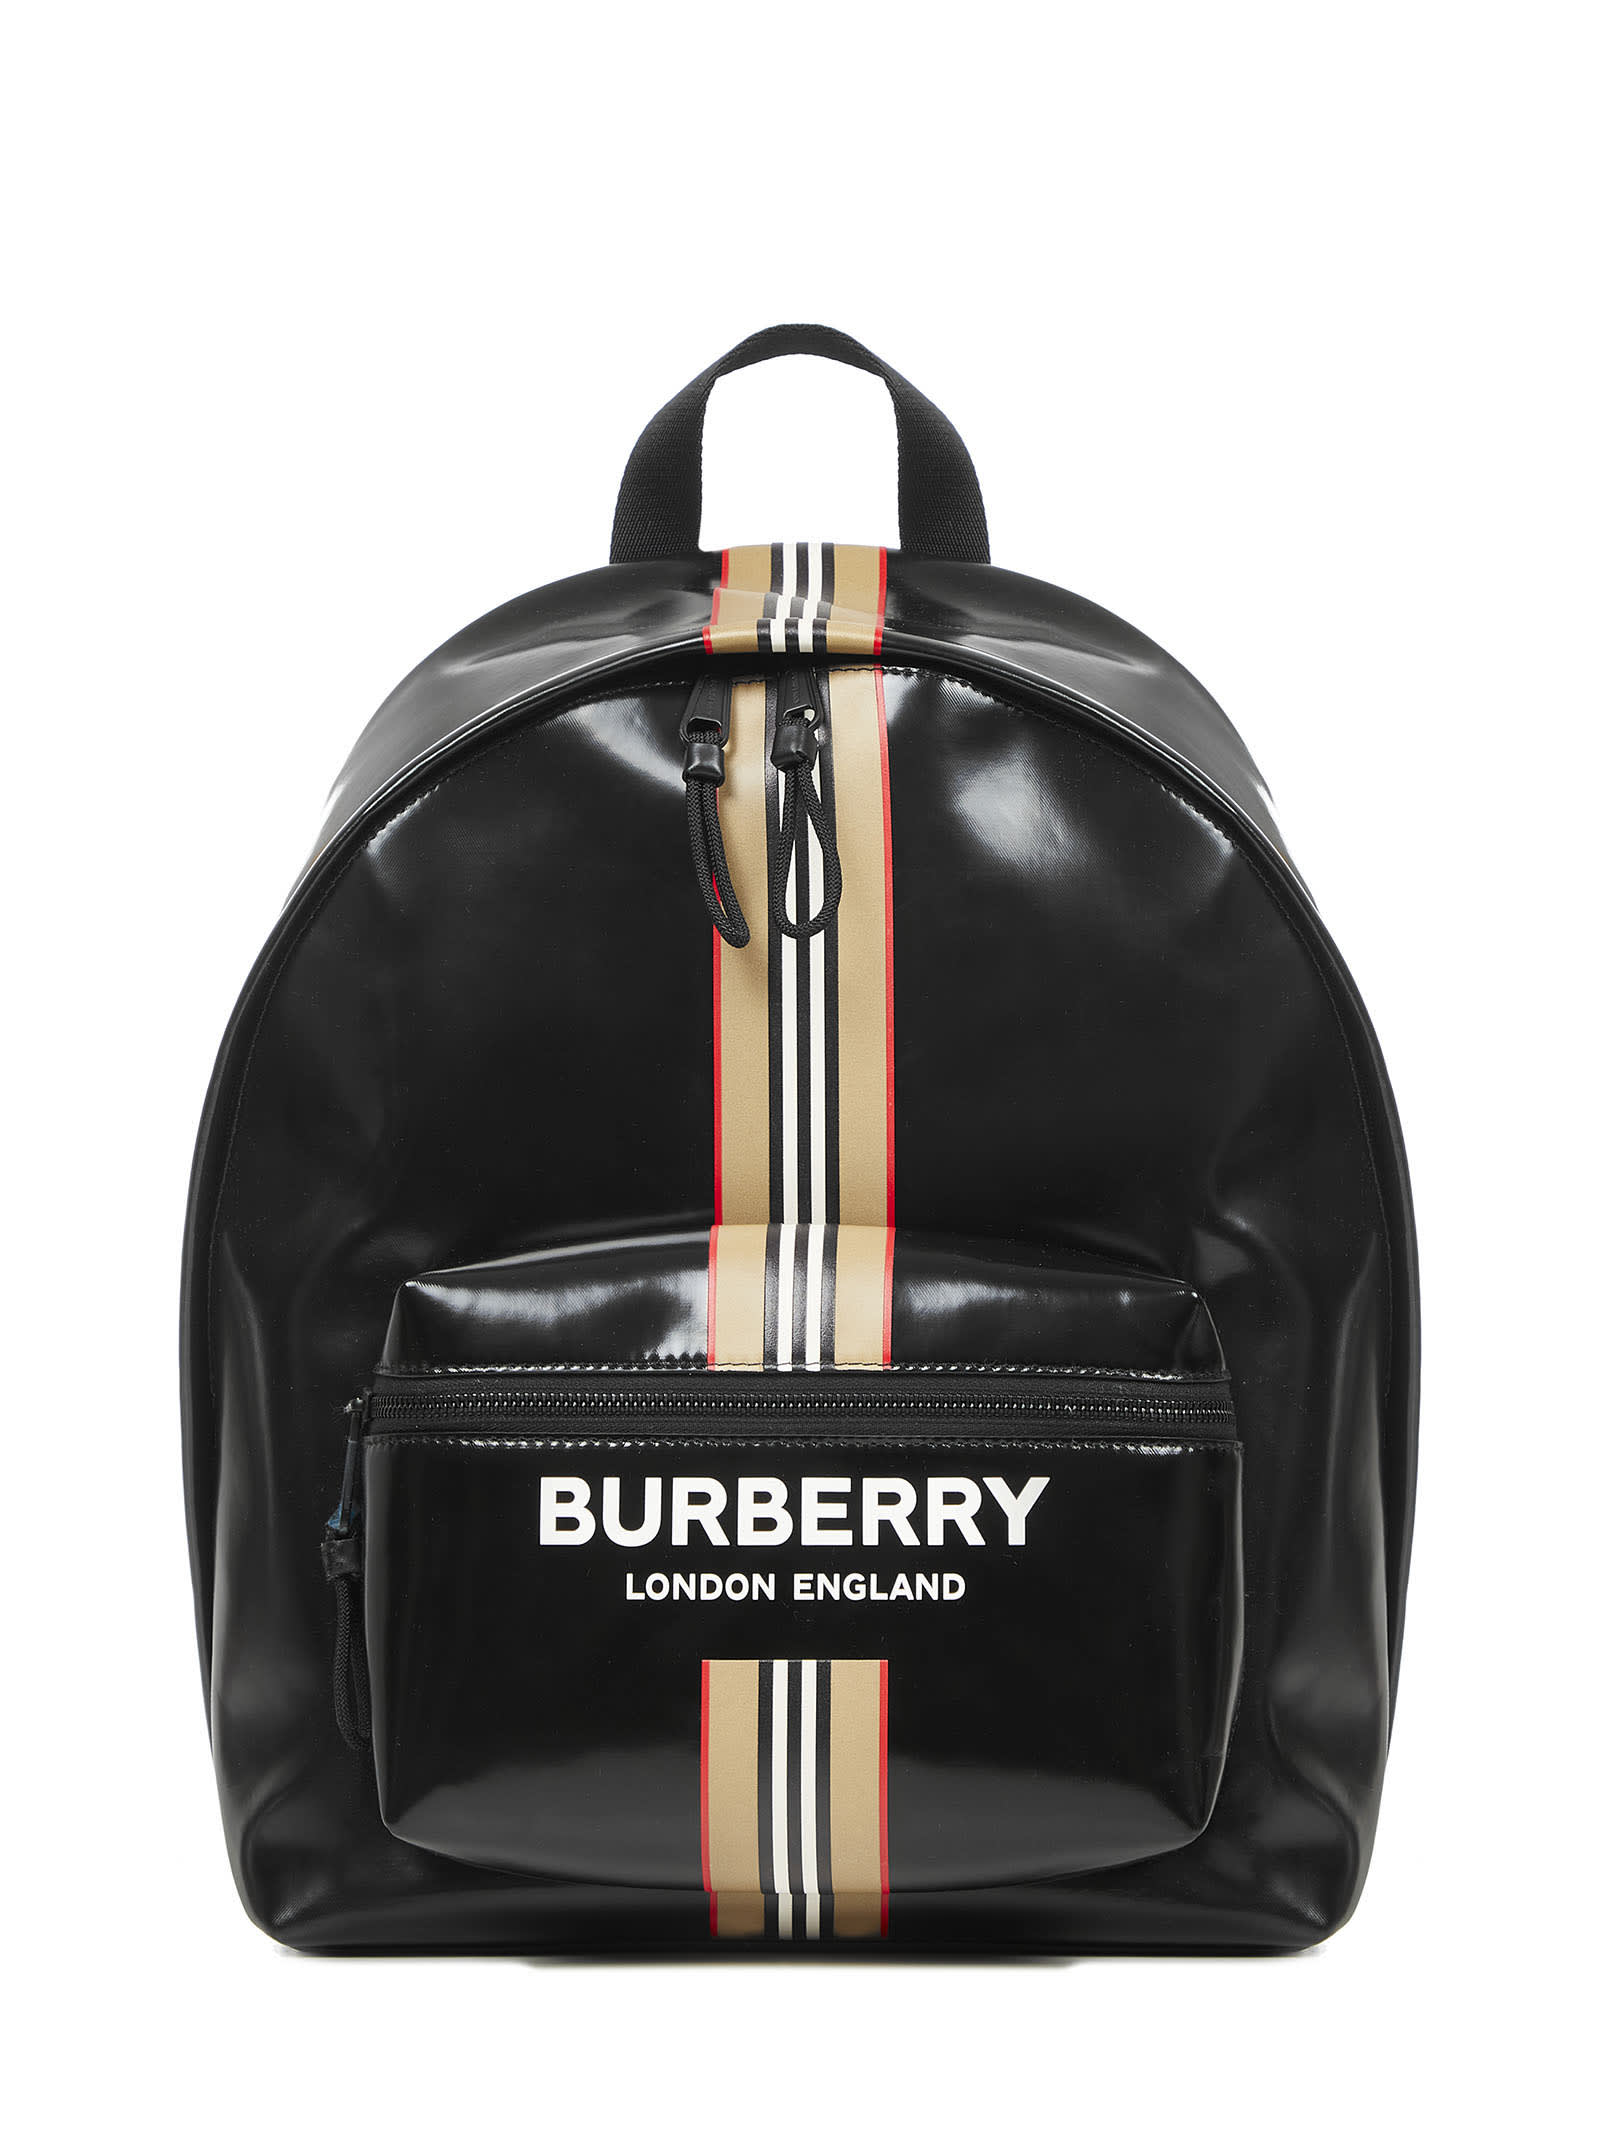 burberry backpack on sale